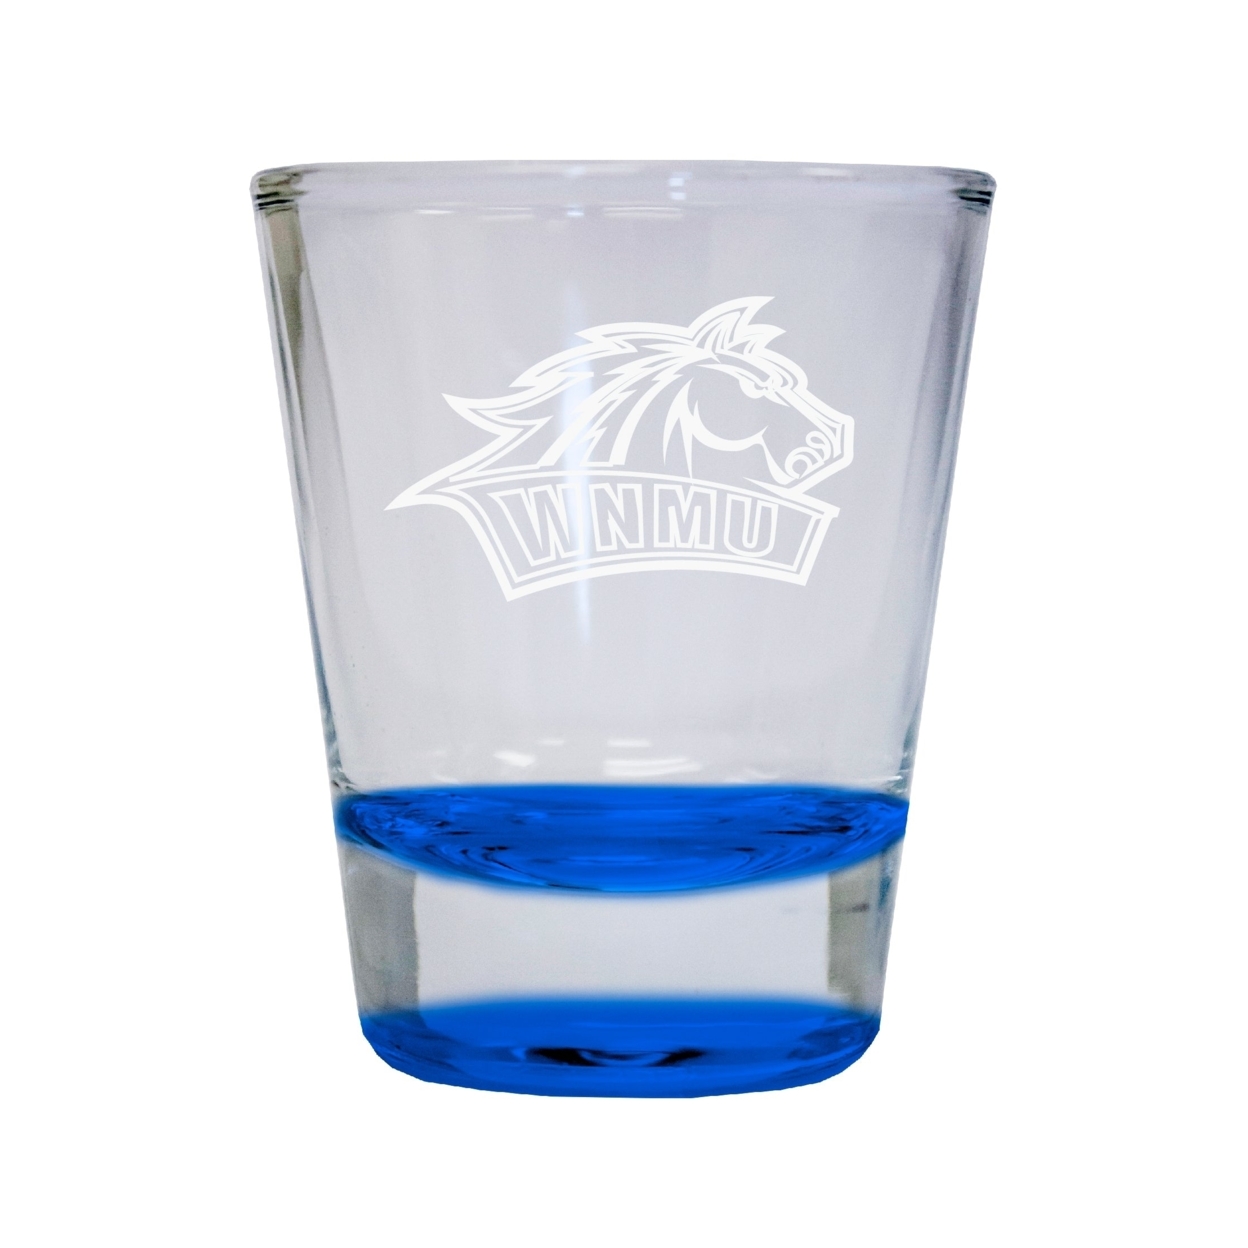 Western New Mexico University Etched Round Shot Glass 2 Oz Blue